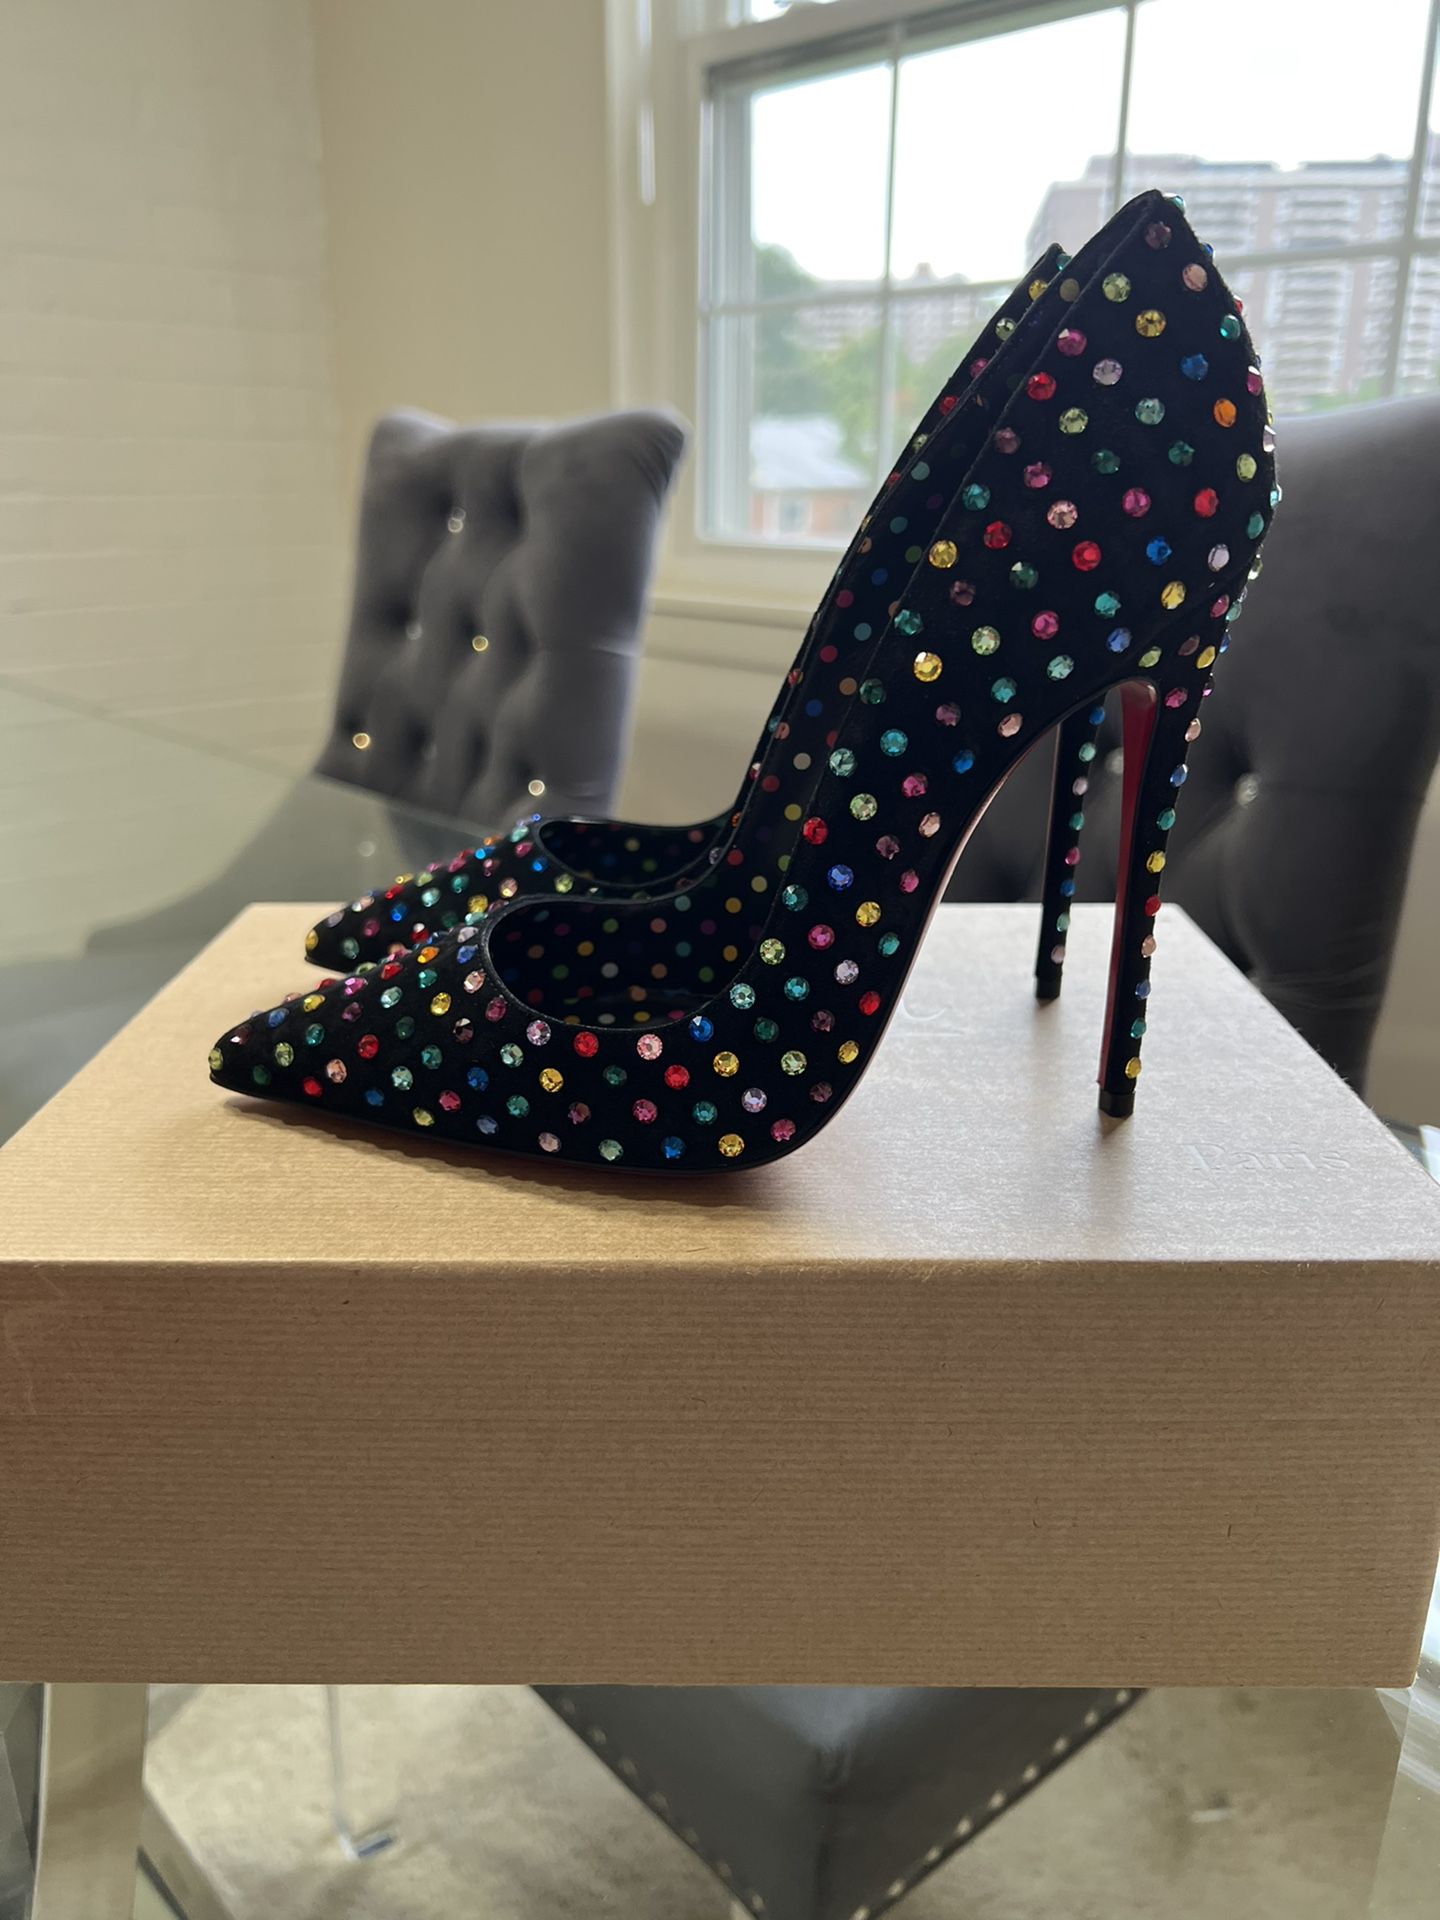 - Authentic Christian Louboutin Heels - Brand New with Box! Never worn - Size 37.5 - Purchased these heels for the Original Price of $1,895 not includ